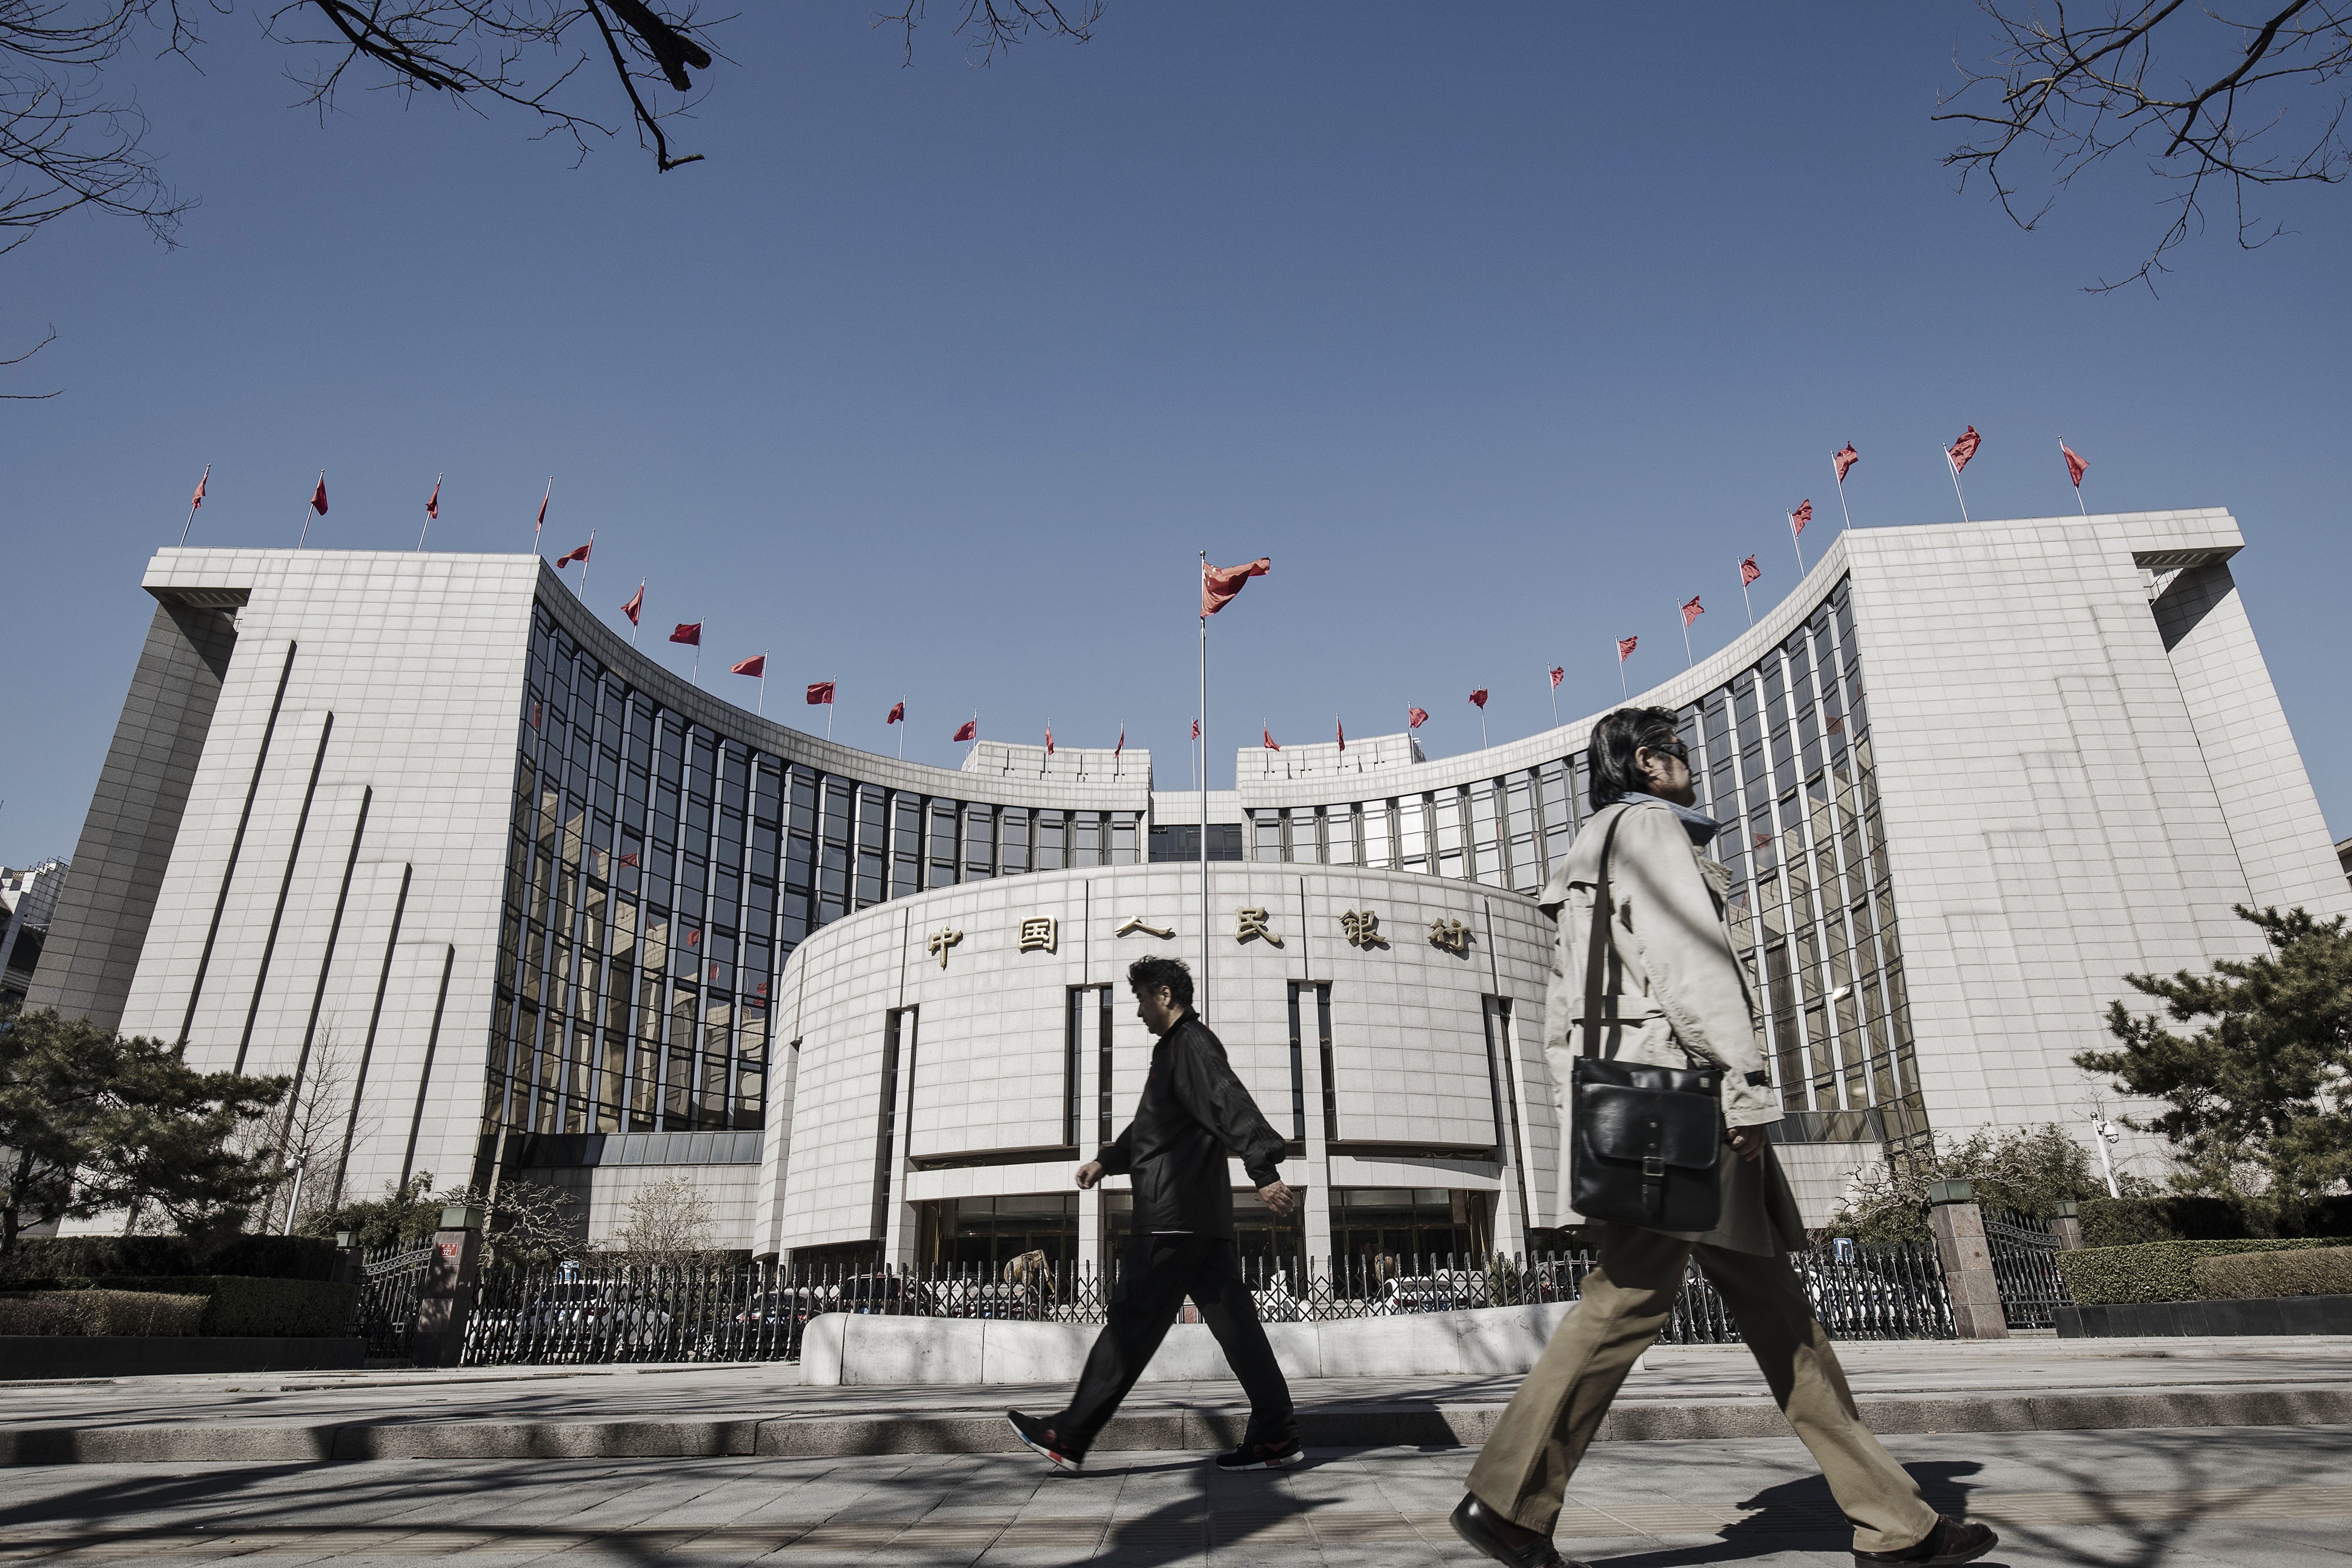 Unlike most central banks, the PBOC has no fundamental insulation from politics, and lacks a transparent, predictable, rules-based framework for setting monetary policy and priorities.